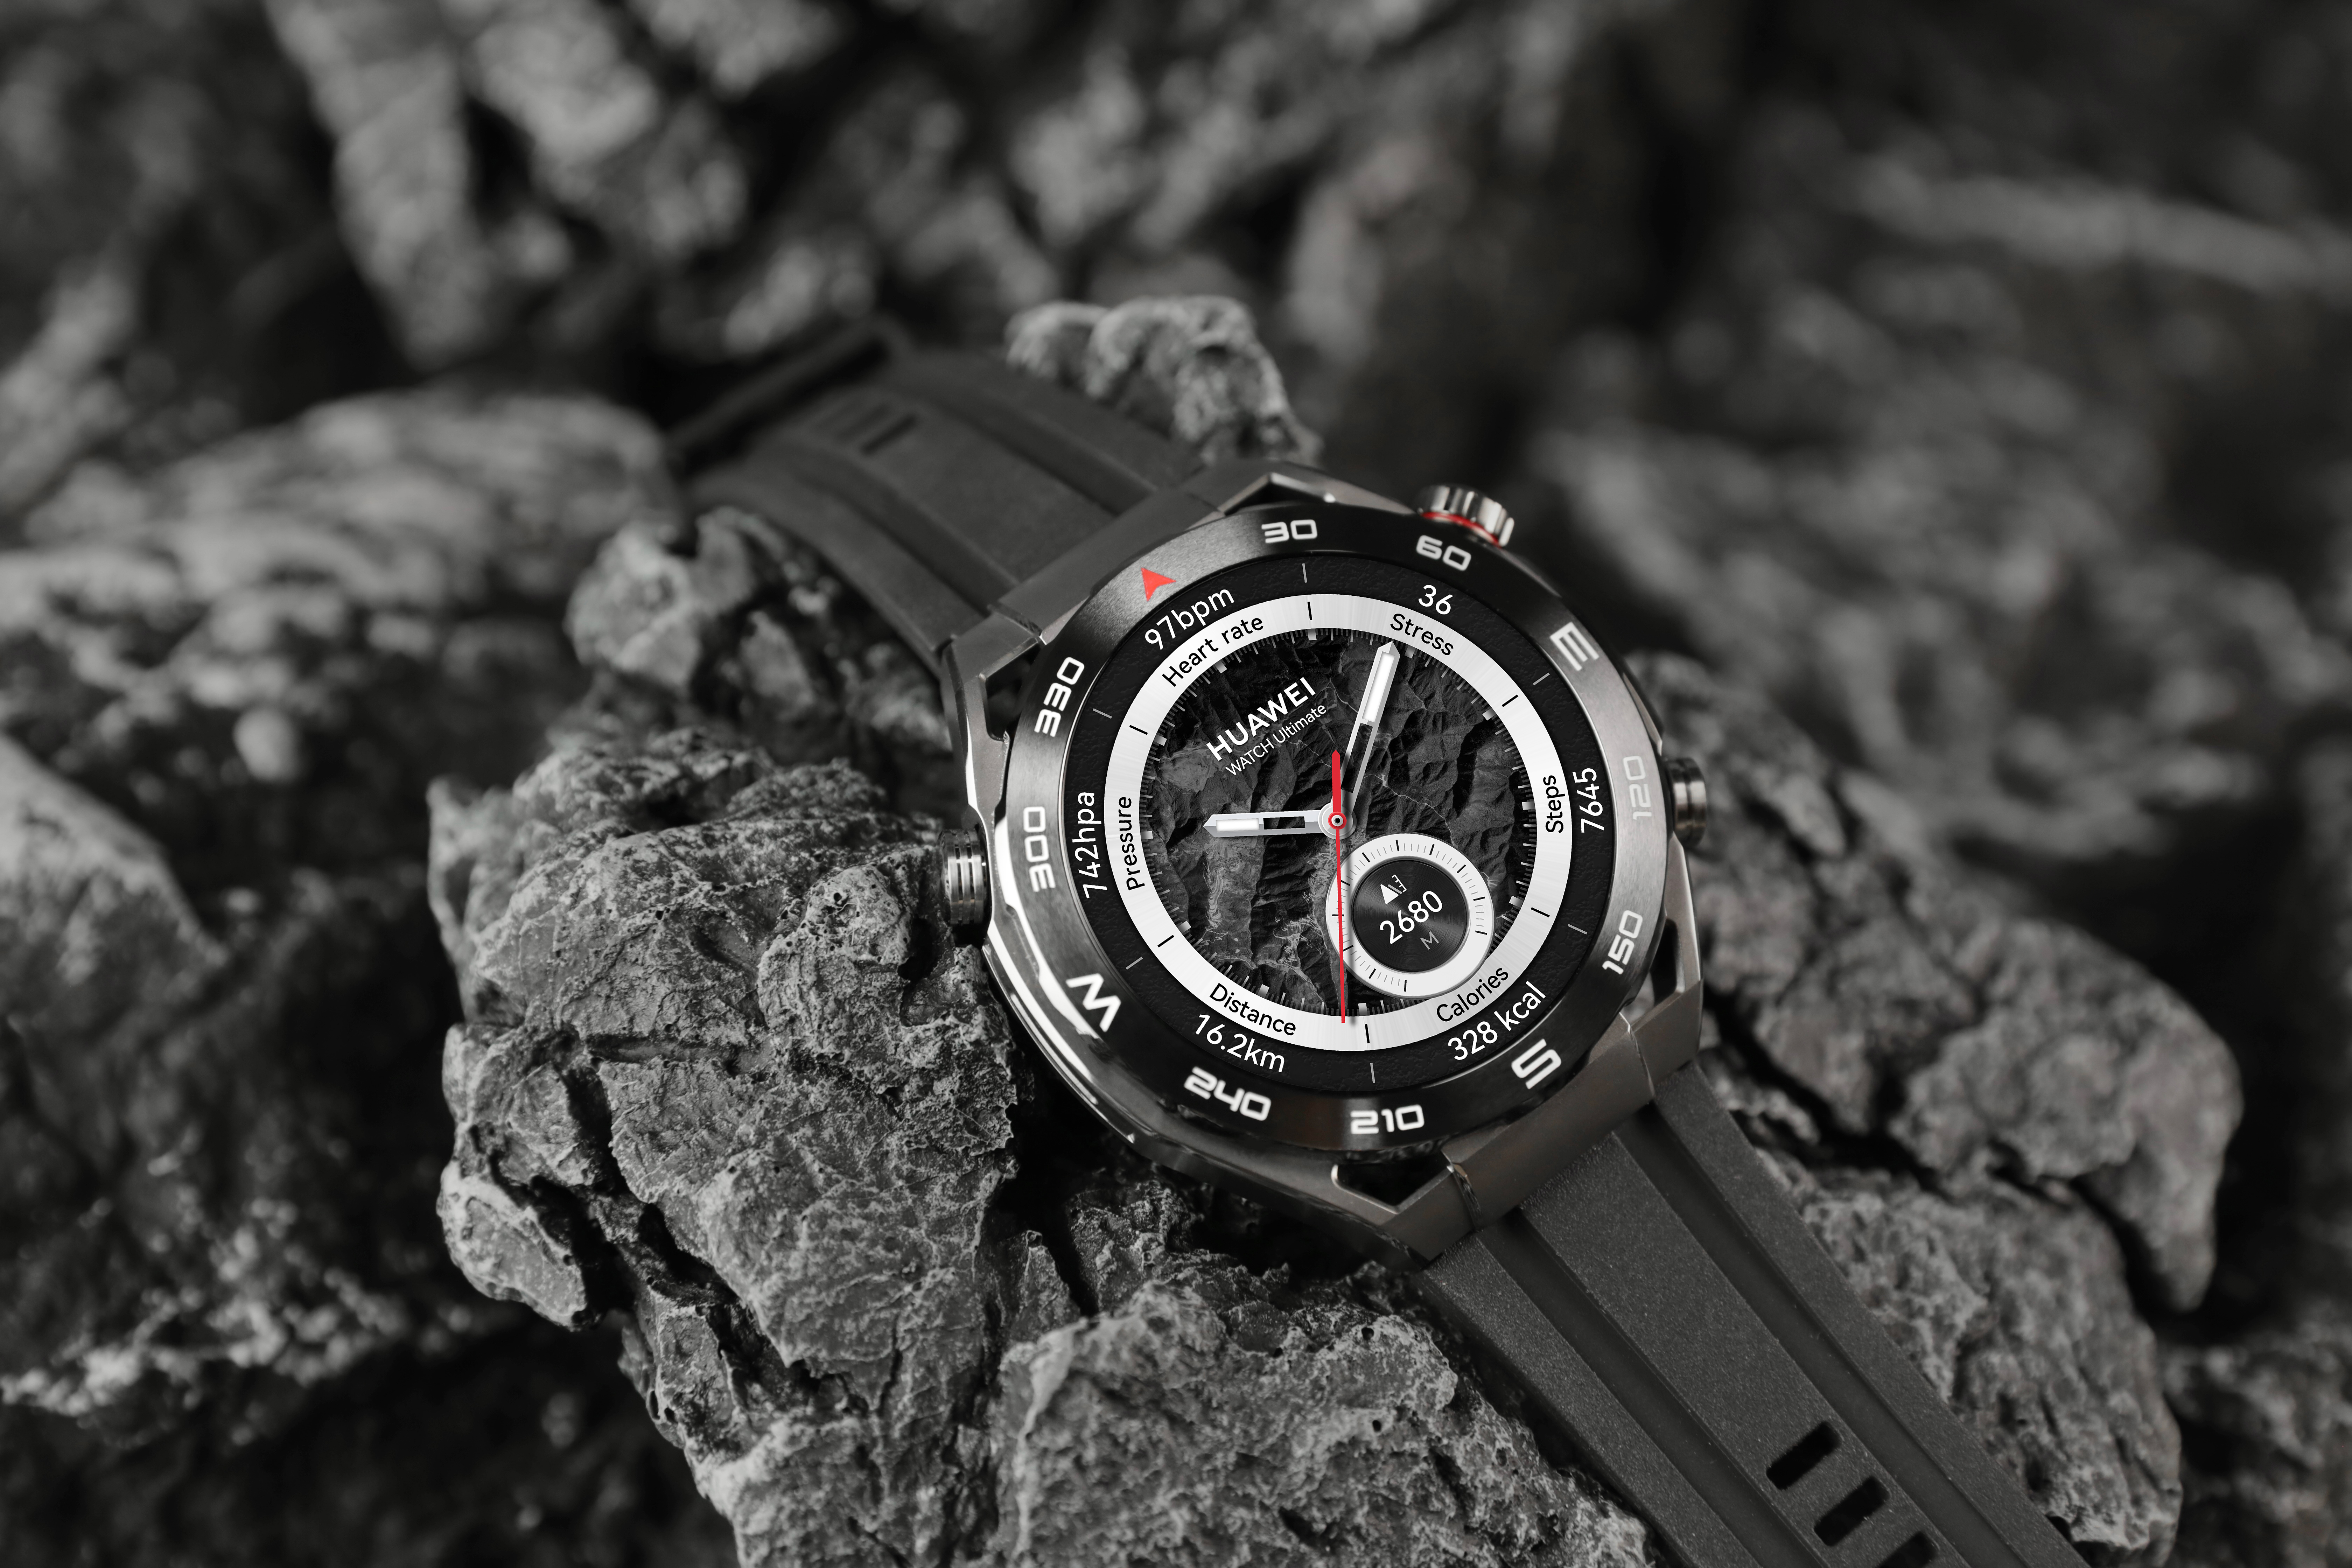 Huawei Watch Ultimate takes smartwatch design to a whole new level